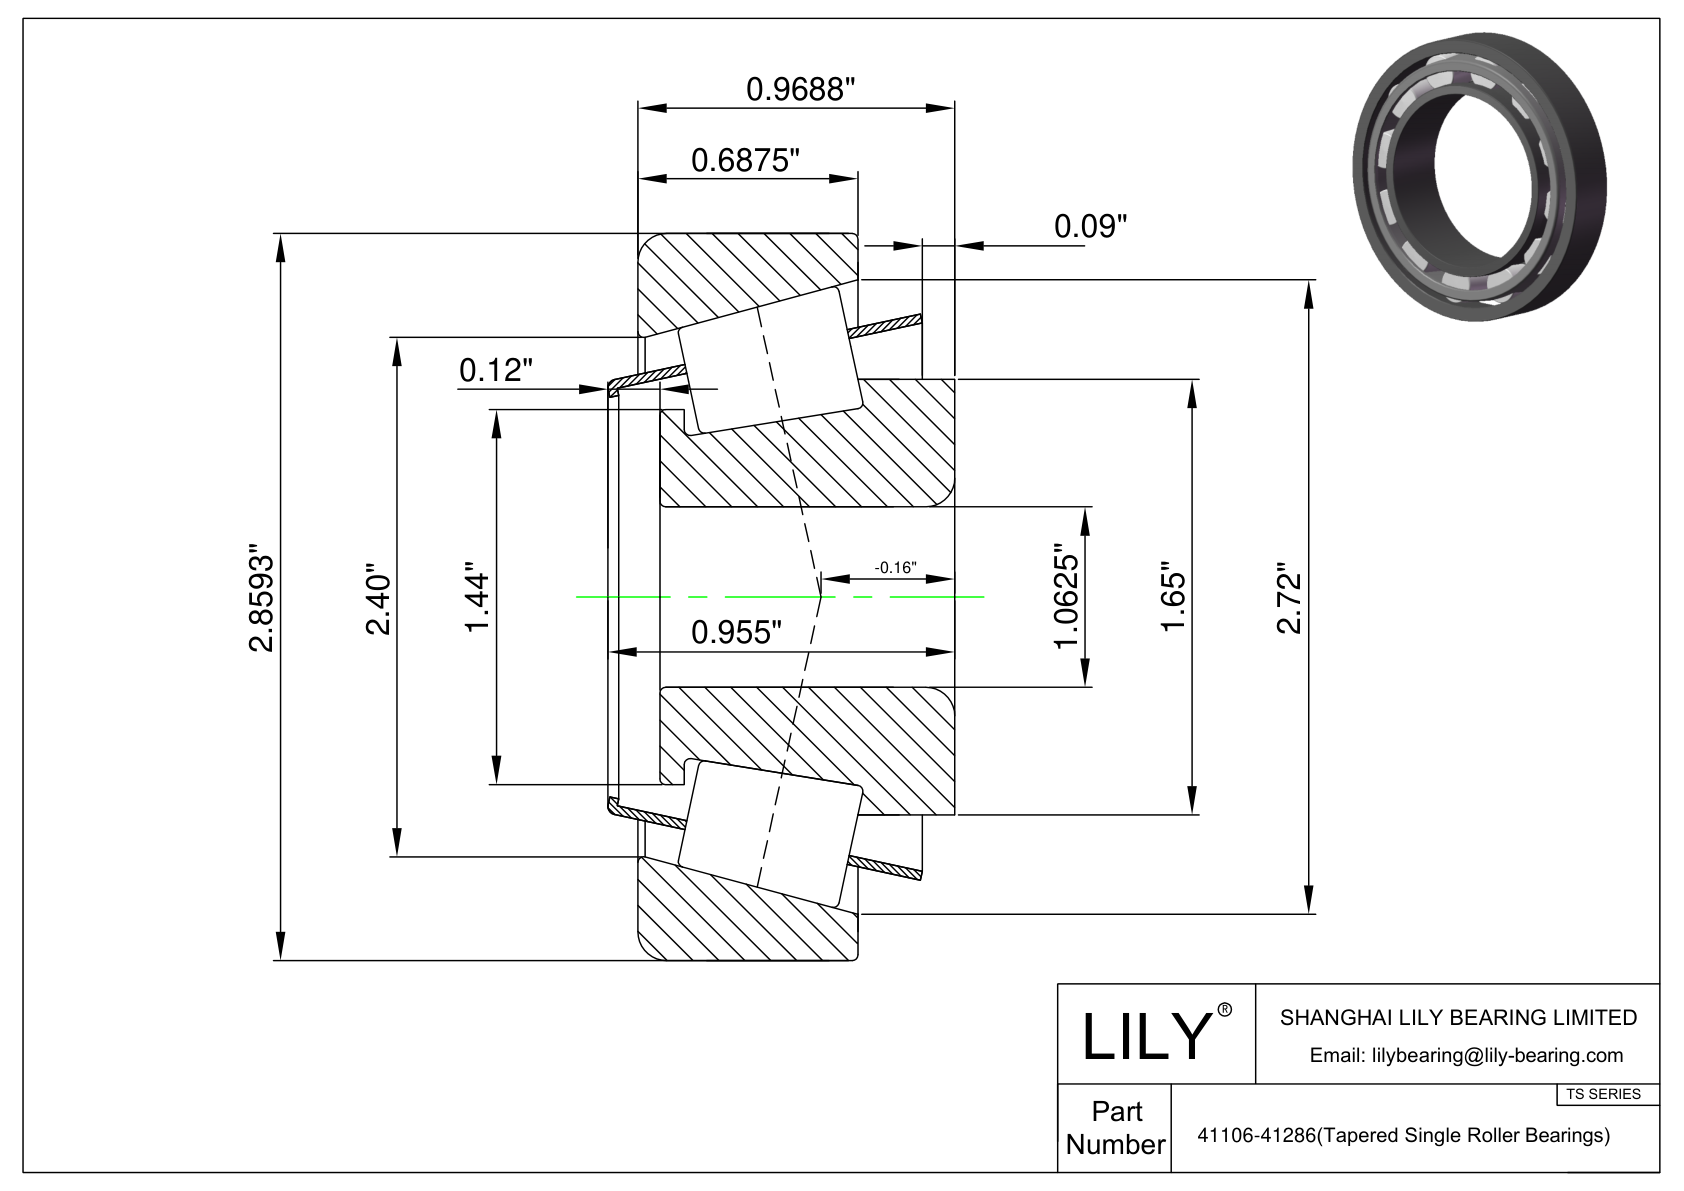 41106-41286 TS (Tapered Single Roller Bearings) (Imperial) cad drawing